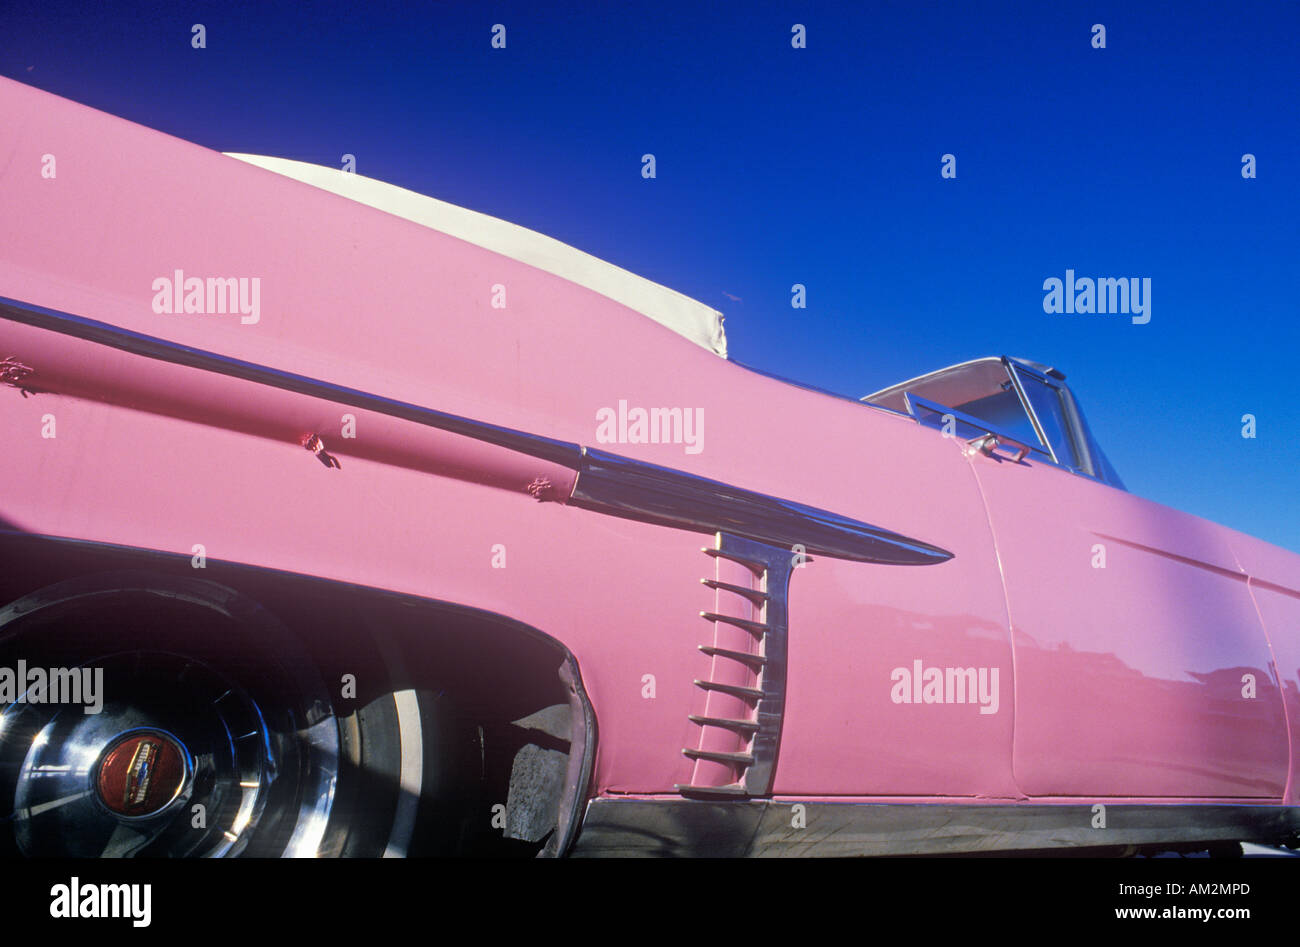 A pink Chevy antique car in Hollywood California Stock Photo